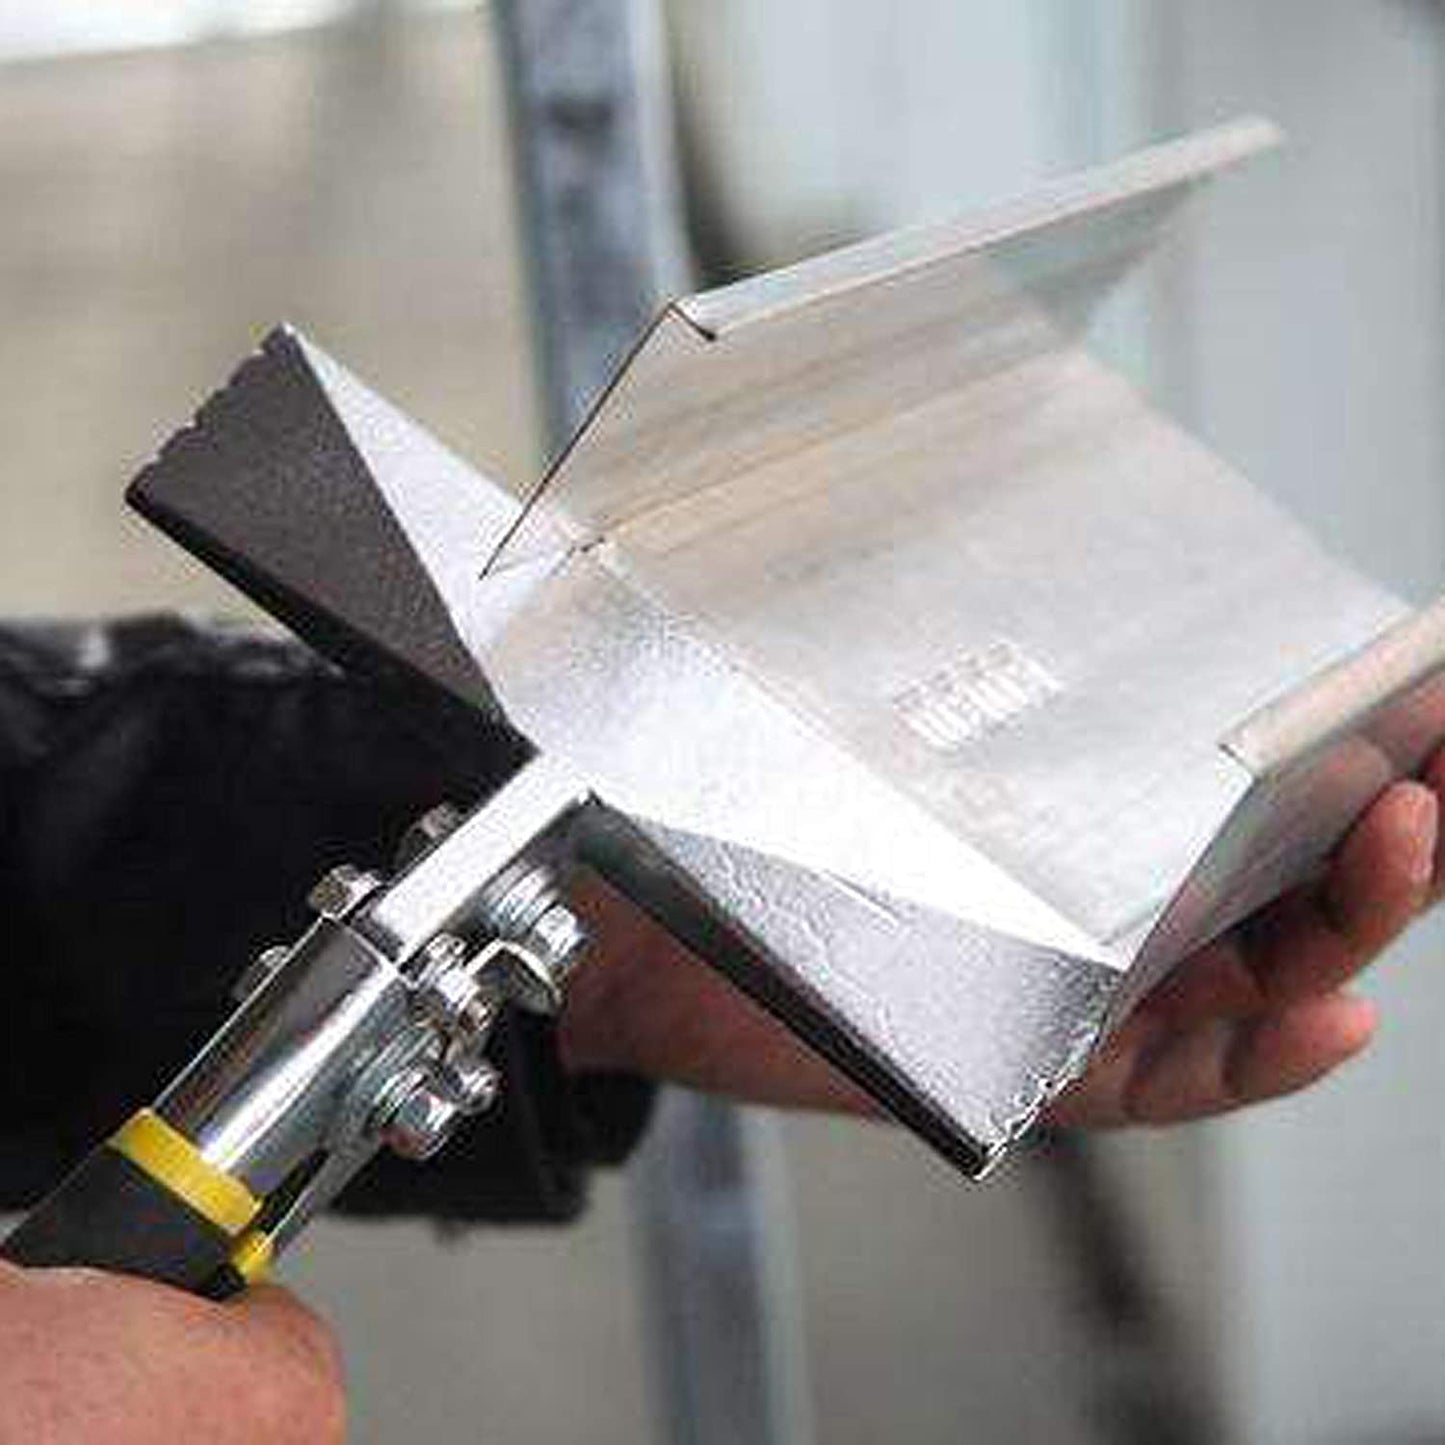 A close-up of a person using Perma Cover High Quality Sheet Metal Hand Seamers - Multiple Sizes Available to cut or shape a piece of metal. The tool has a yellow and black handle, perfect for bending, seaming, and flattening the shiny, angular metal piece. The background is blurred with indistinct shapes and colors.